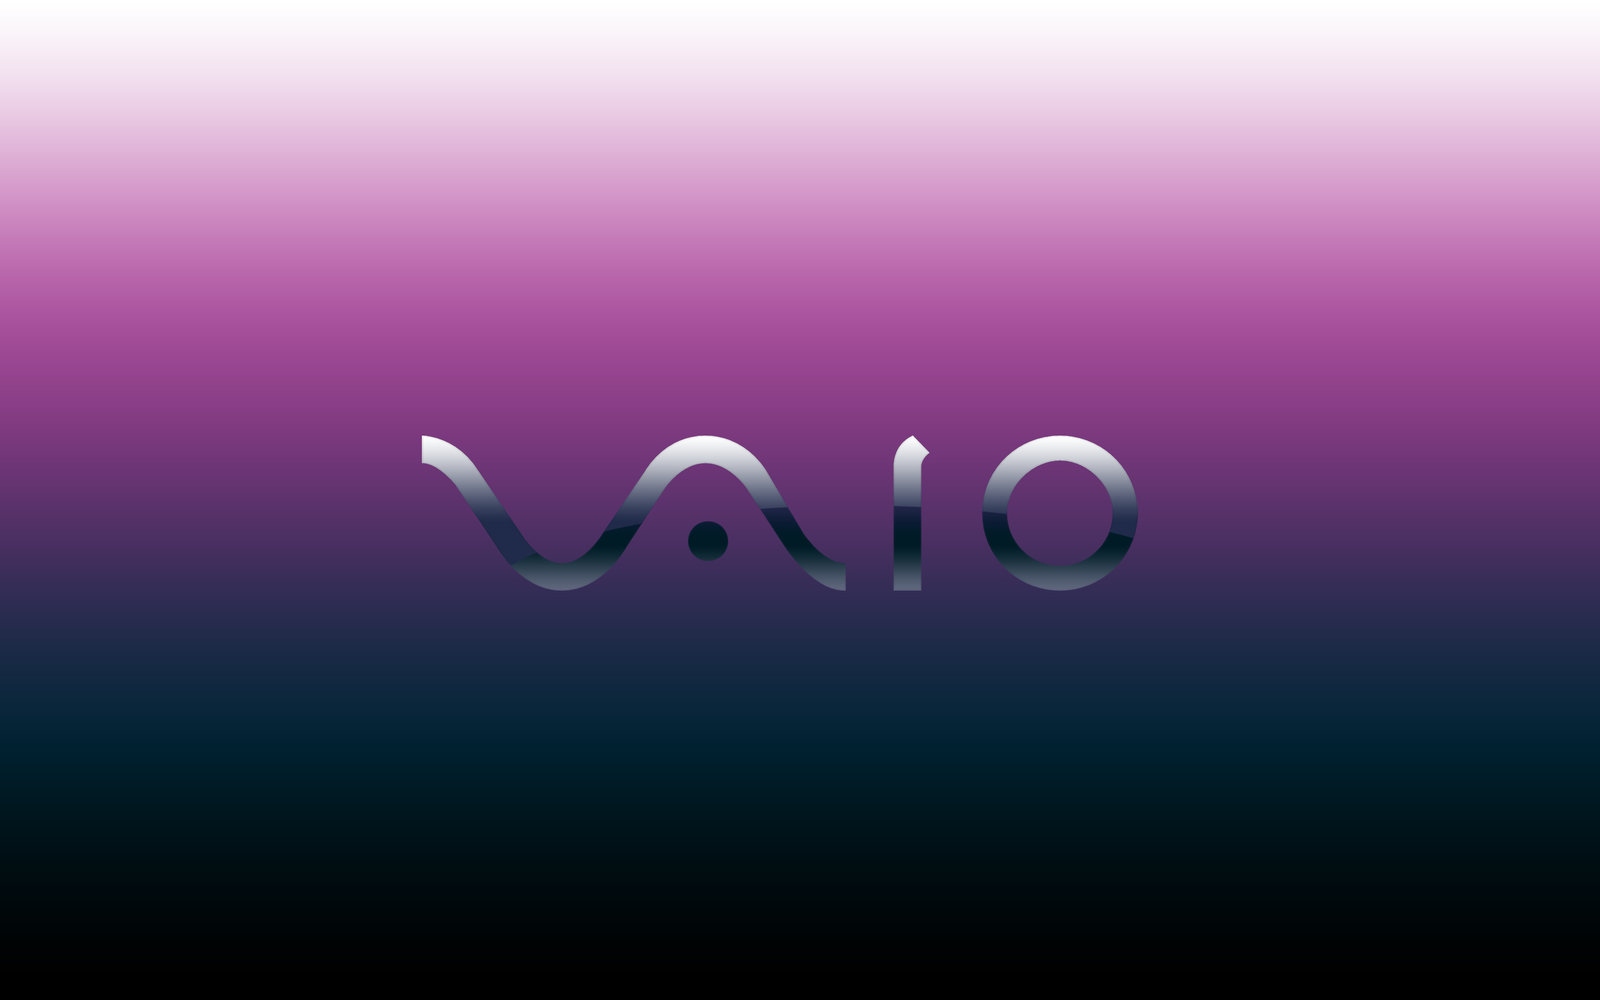 Free Download Sony Vaio Wallpaper By Ujkm Customization Wallpaper Hdtv Widescreen 1600x1000 For Your Desktop Mobile Tablet Explore 50 Sony Vaio Wallpaper 1080p Sony Wallpapers 19x1080 Sony Vaio Desktop